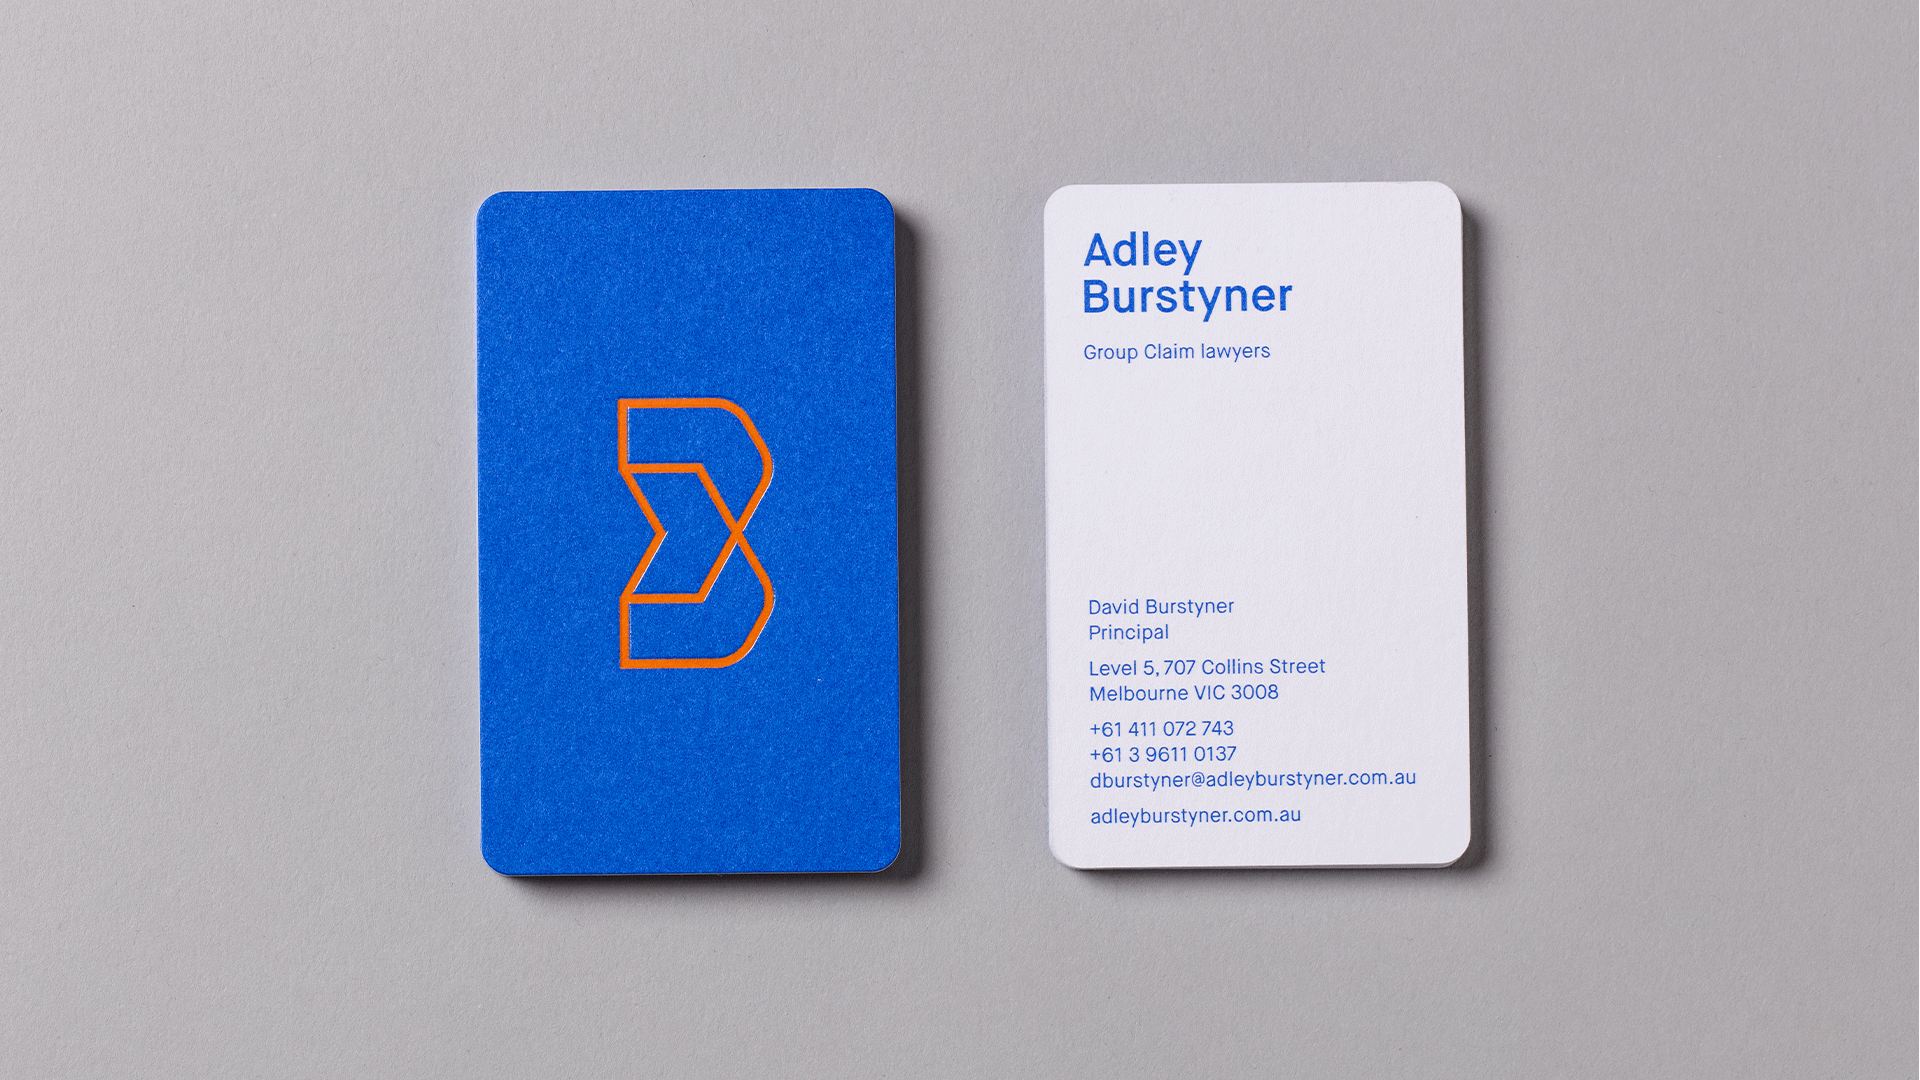 Adley Burstyner Law Firm branding business card front and back sides presented